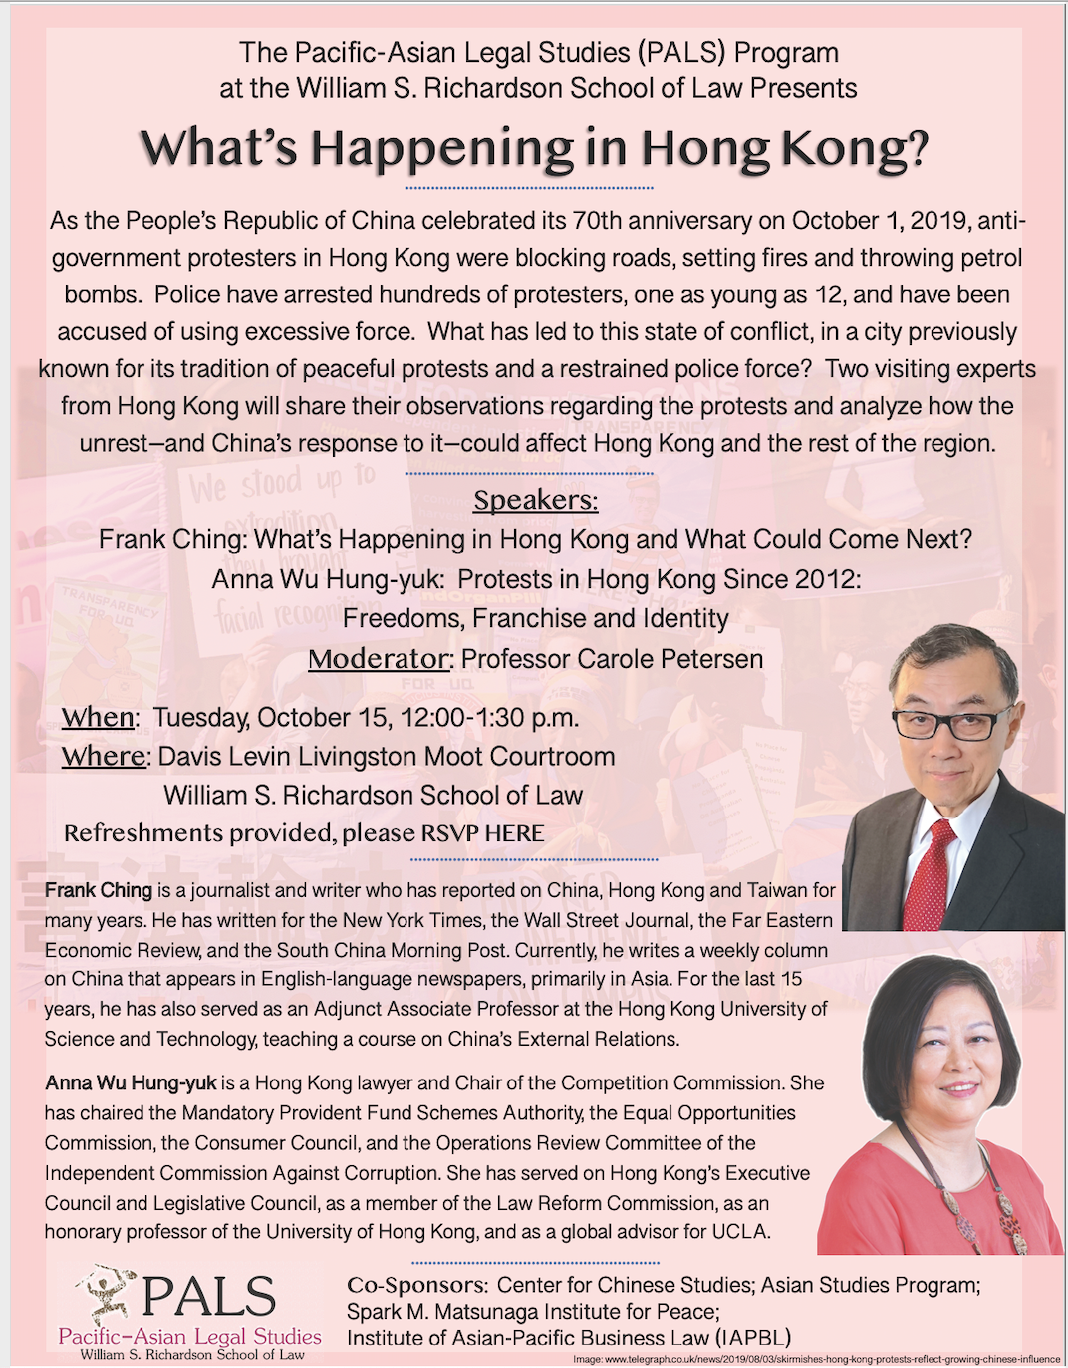 Poster for Pacific-Asian Legal Studies (PALS) Program at William S. Richardson School of Law entitled "What's Happening in Hong Kong?" Black text on pink background with protestors faintly seen. Two portraits on right side, one of Frank Ching wearing a black suit, red tie and black glasses and one of Anna Wu Hung-yuk with a short black bob wearing a red blouse and multi-colored necklace.